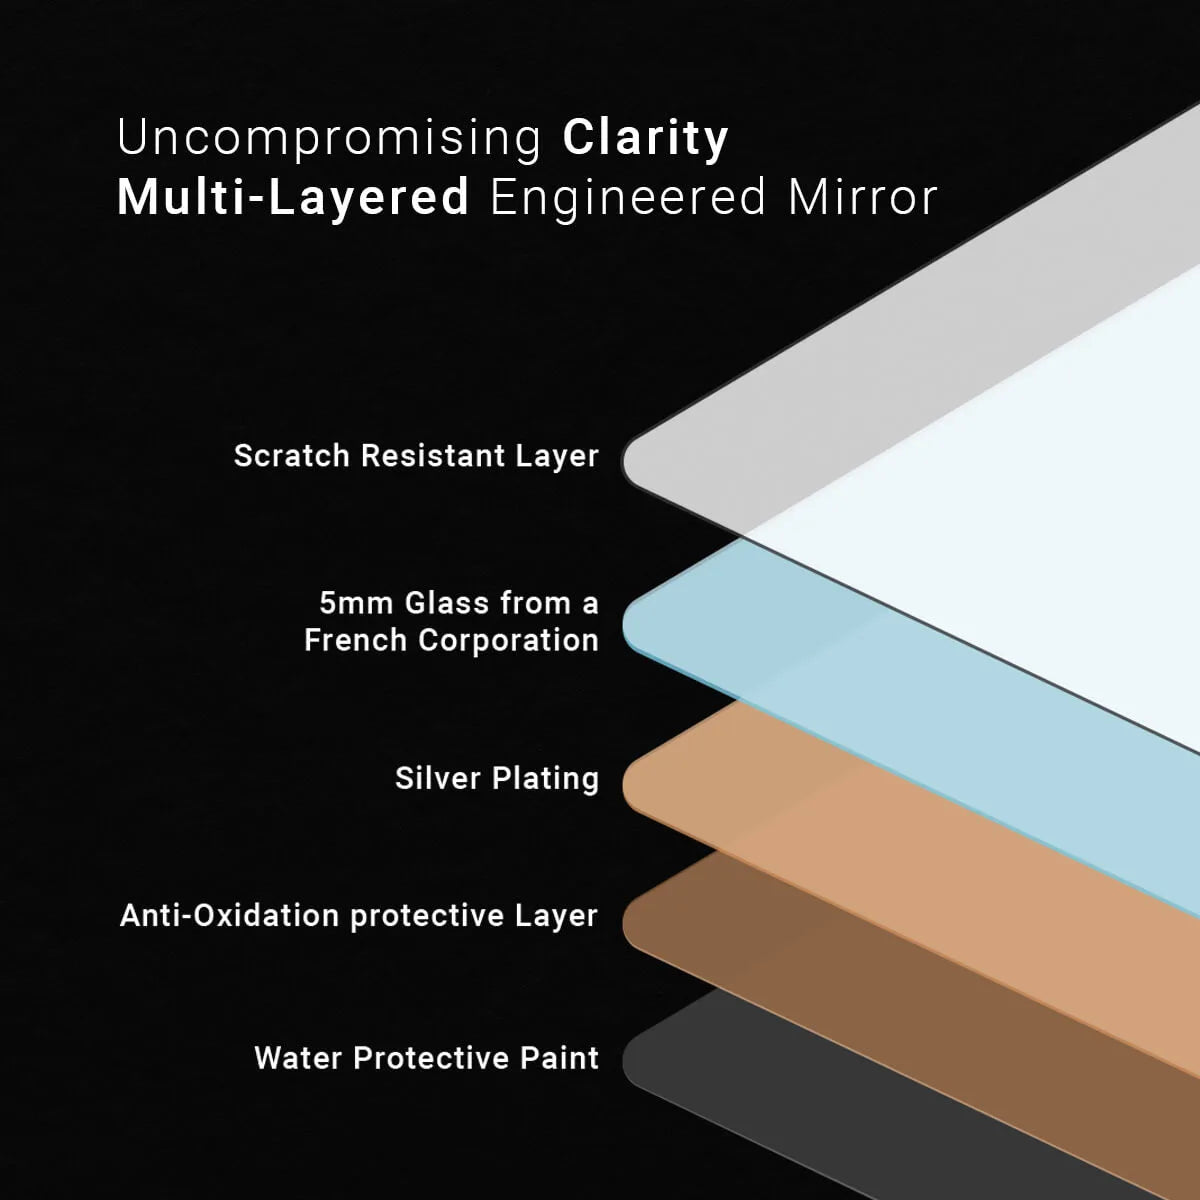 A technical diagram showcasing the five layers of a multi-layered engineered mirror: a scratch-resistant layer, 5mm French glass, a silver plating, and an anti-oxidation protective layer with a water-resistant paint on a black background. Text labels identify each layer.